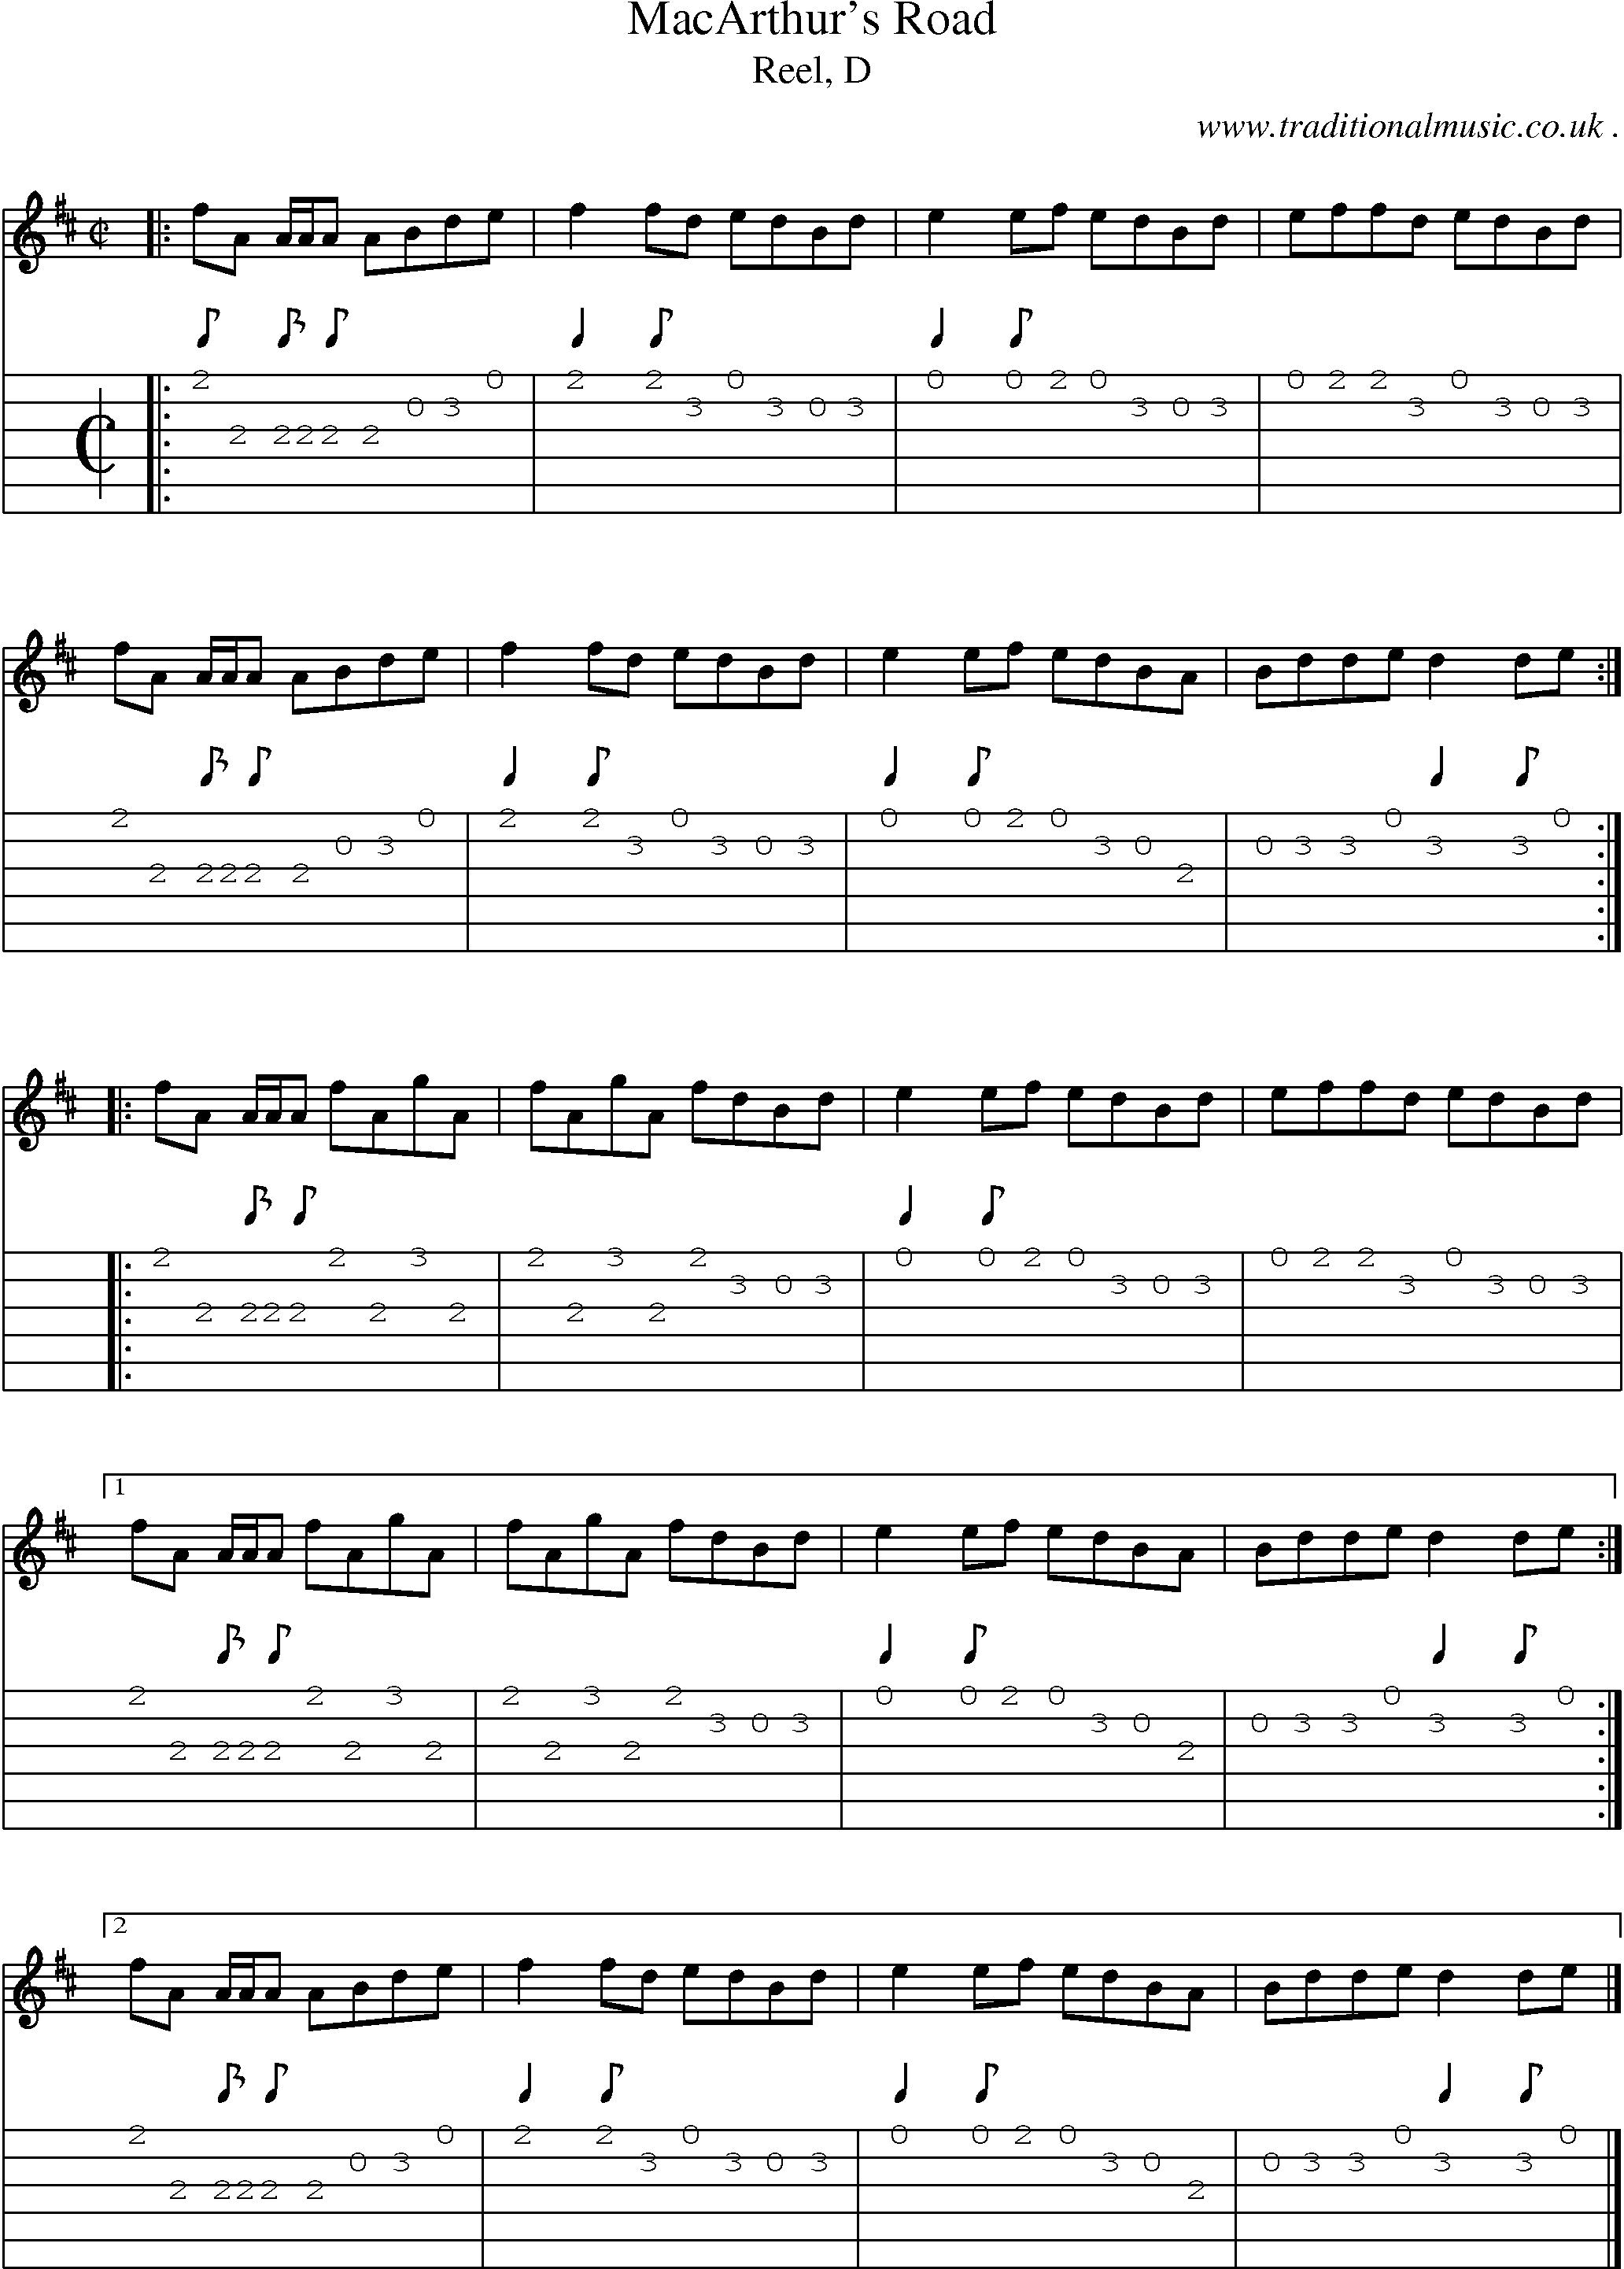 Sheet-music  score, Chords and Guitar Tabs for Macarthurs Road